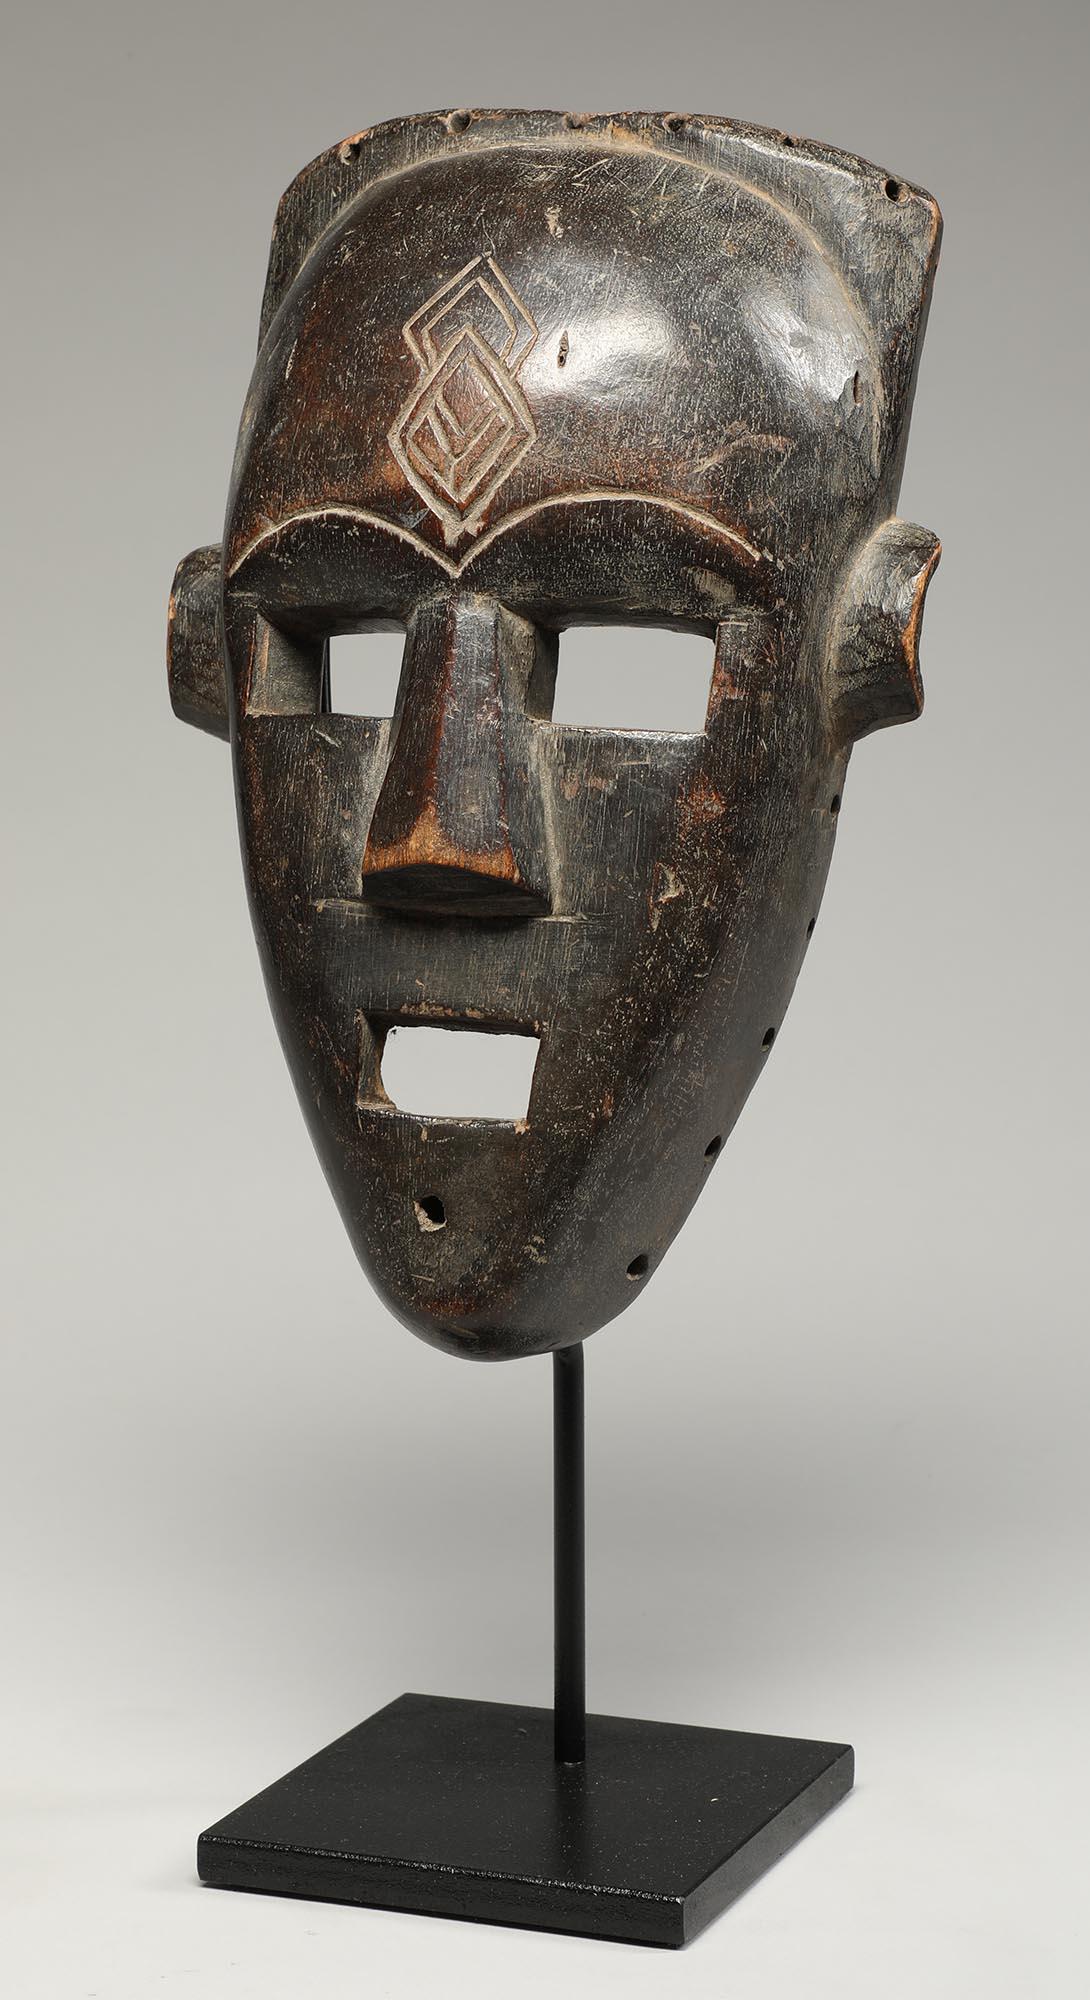 Fine and well carved wood Kuba Kete face mask with striking open square eyes and mouth, incised scarification mark on forehead, interesting backwards facing ears. From Democratic Republic of Congo, early 20th century. Ex private collection WA, ex